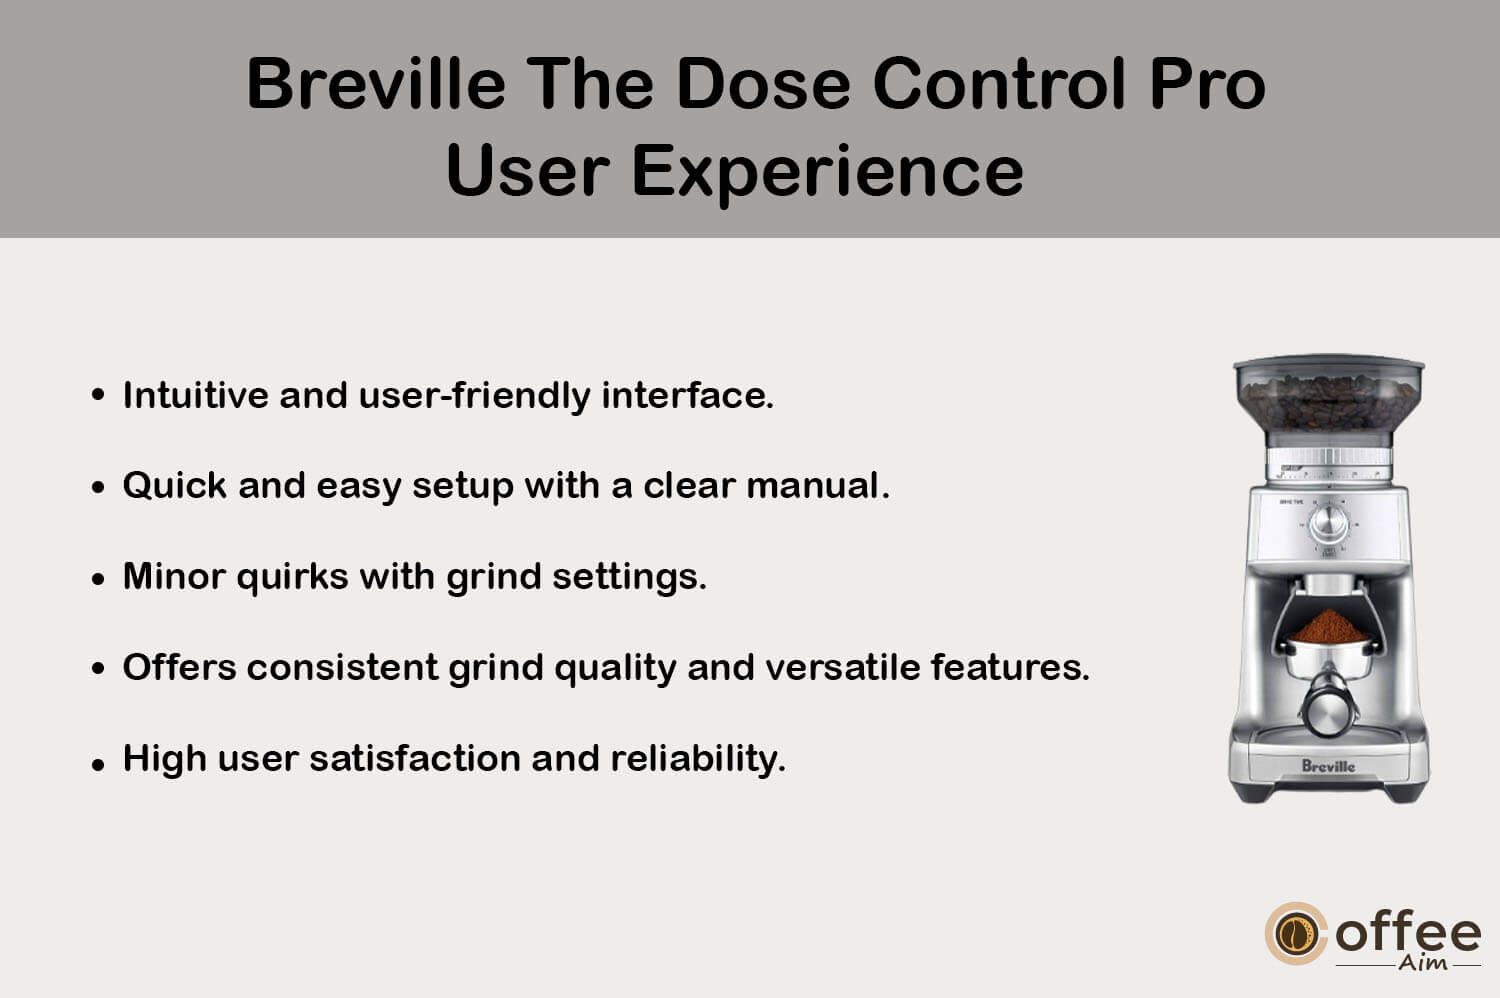 This visual encapsulates the user journey with the 'Breville The Dose Control Pro,' illustrating the holistic experience within the context of the 'Breville The Dose Control Pro Review' article.